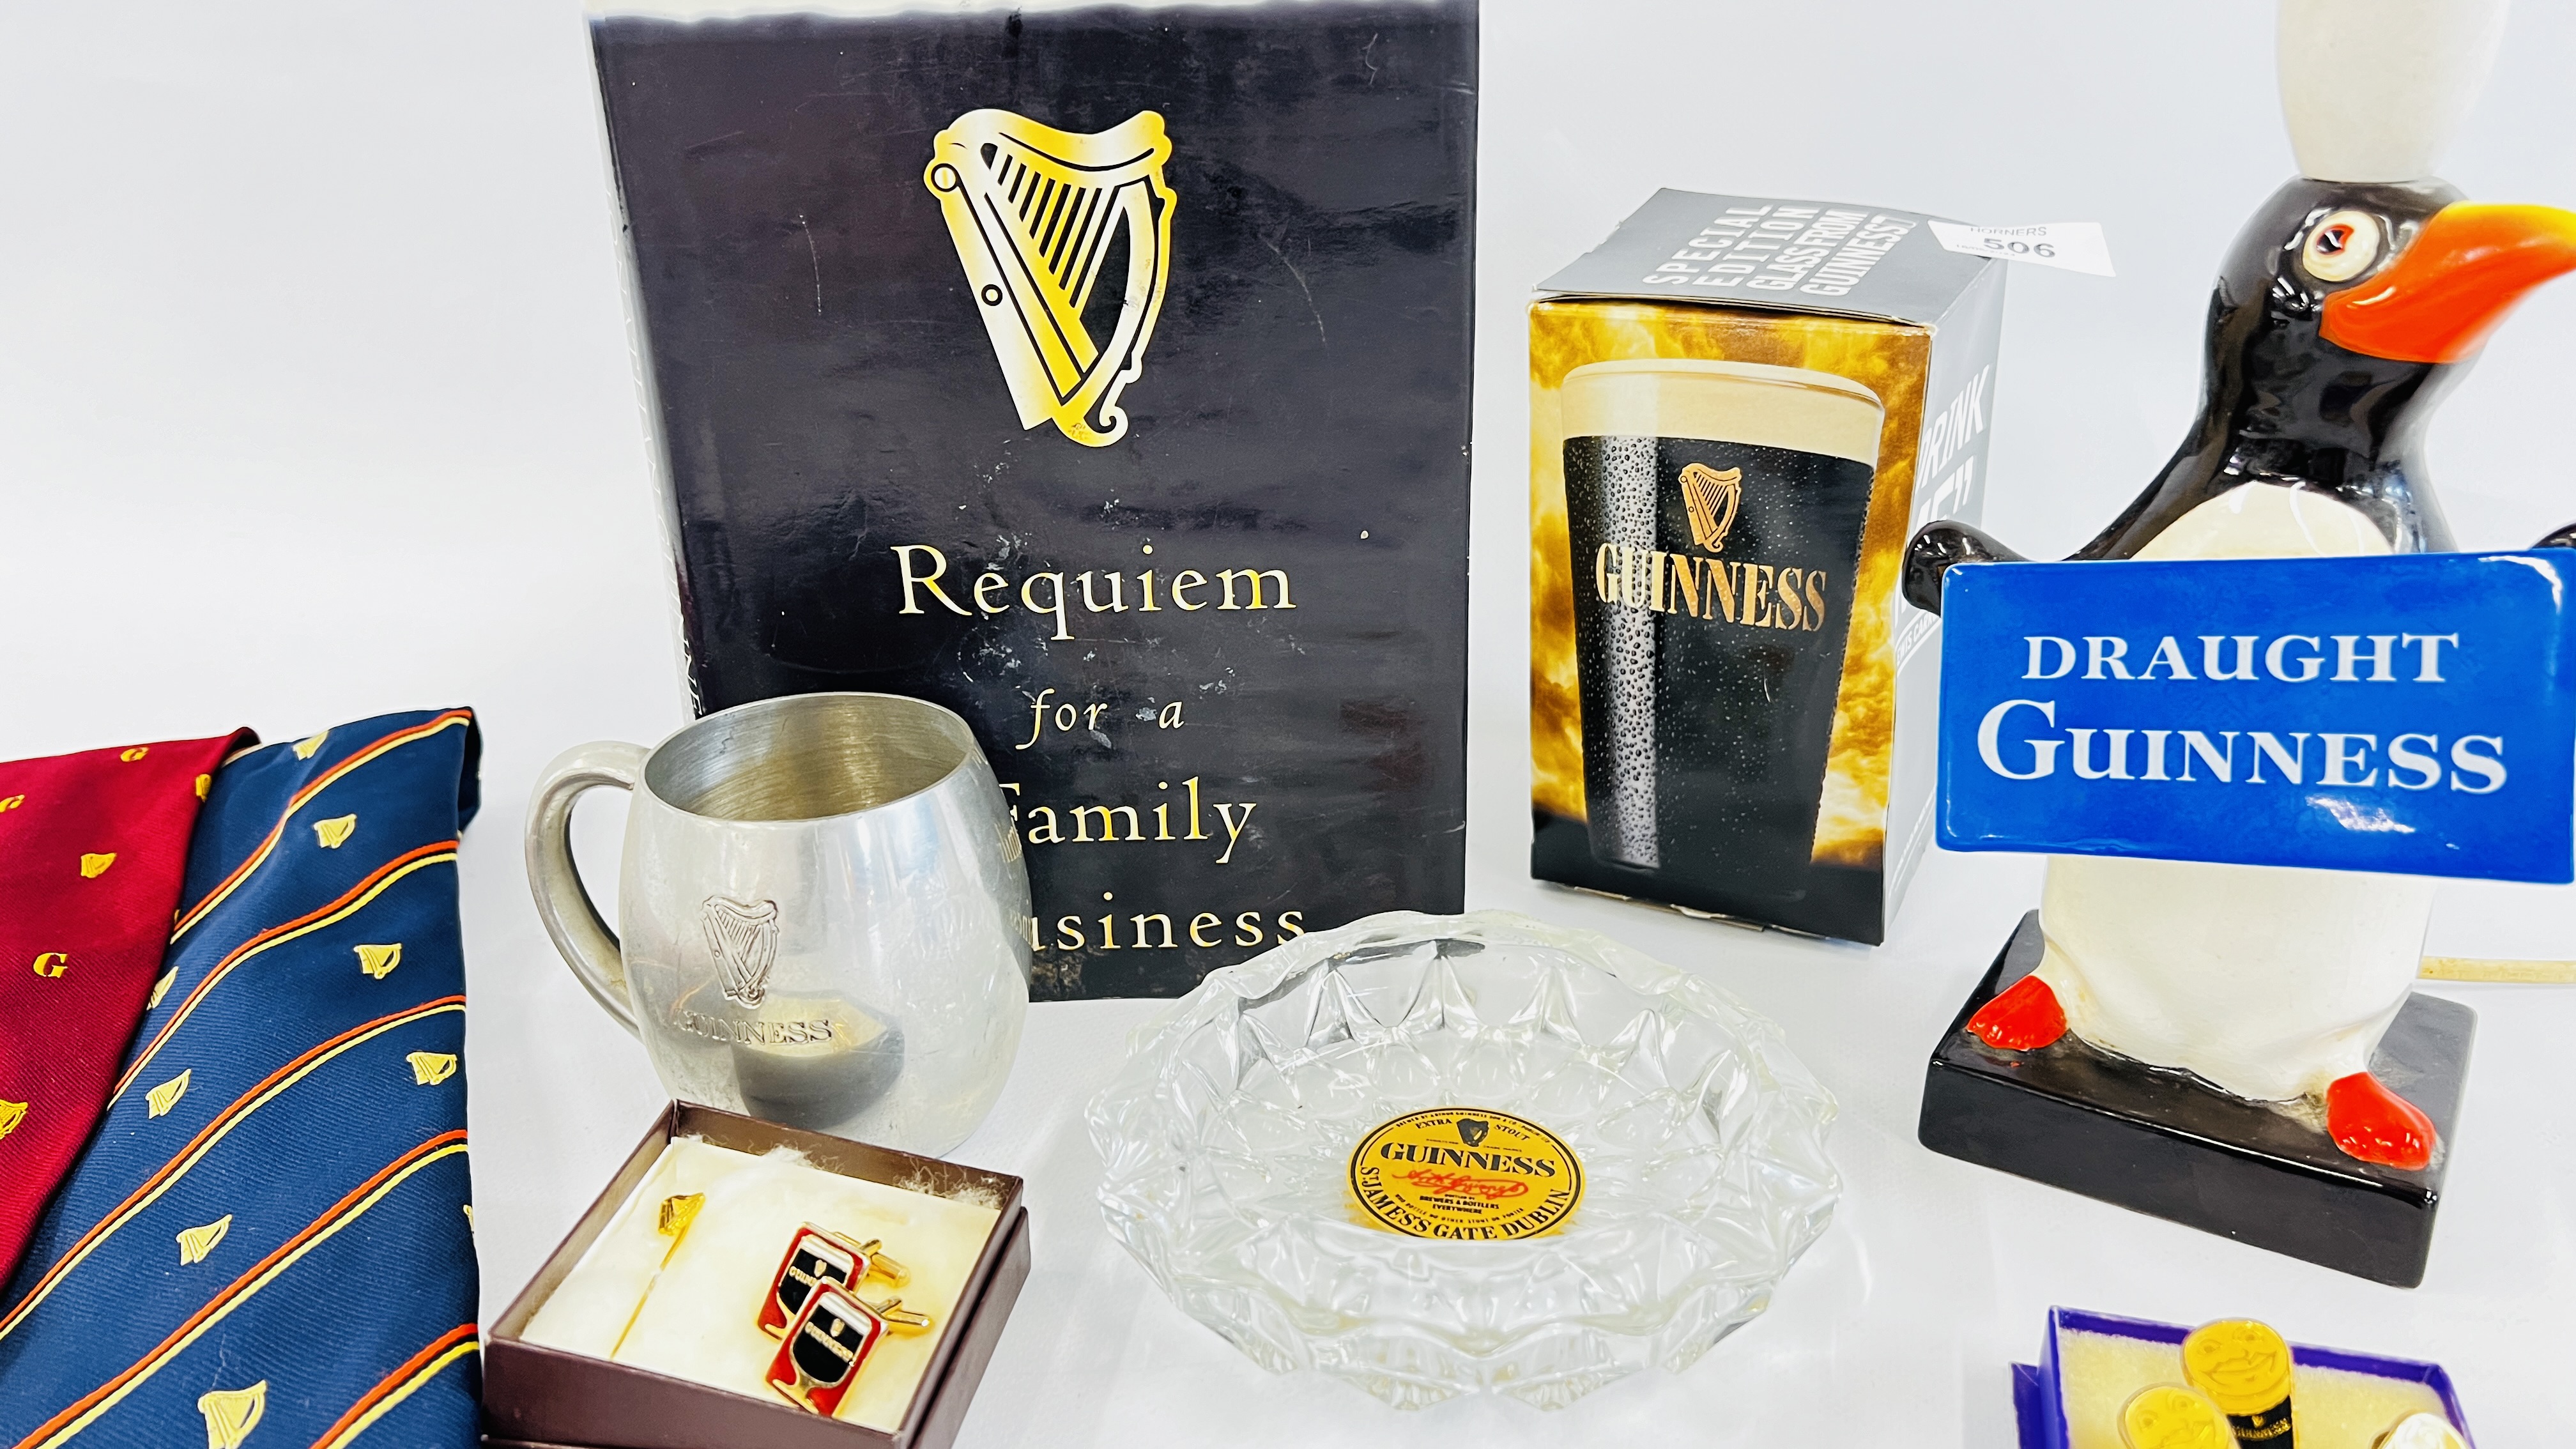 GUINNESS MERCHANDISE TO INCLUDE VINTAGE PENGUIN "DRAUGHT GUINNESS" TABLE LAMP, CUFF LINKS, - Image 4 of 7